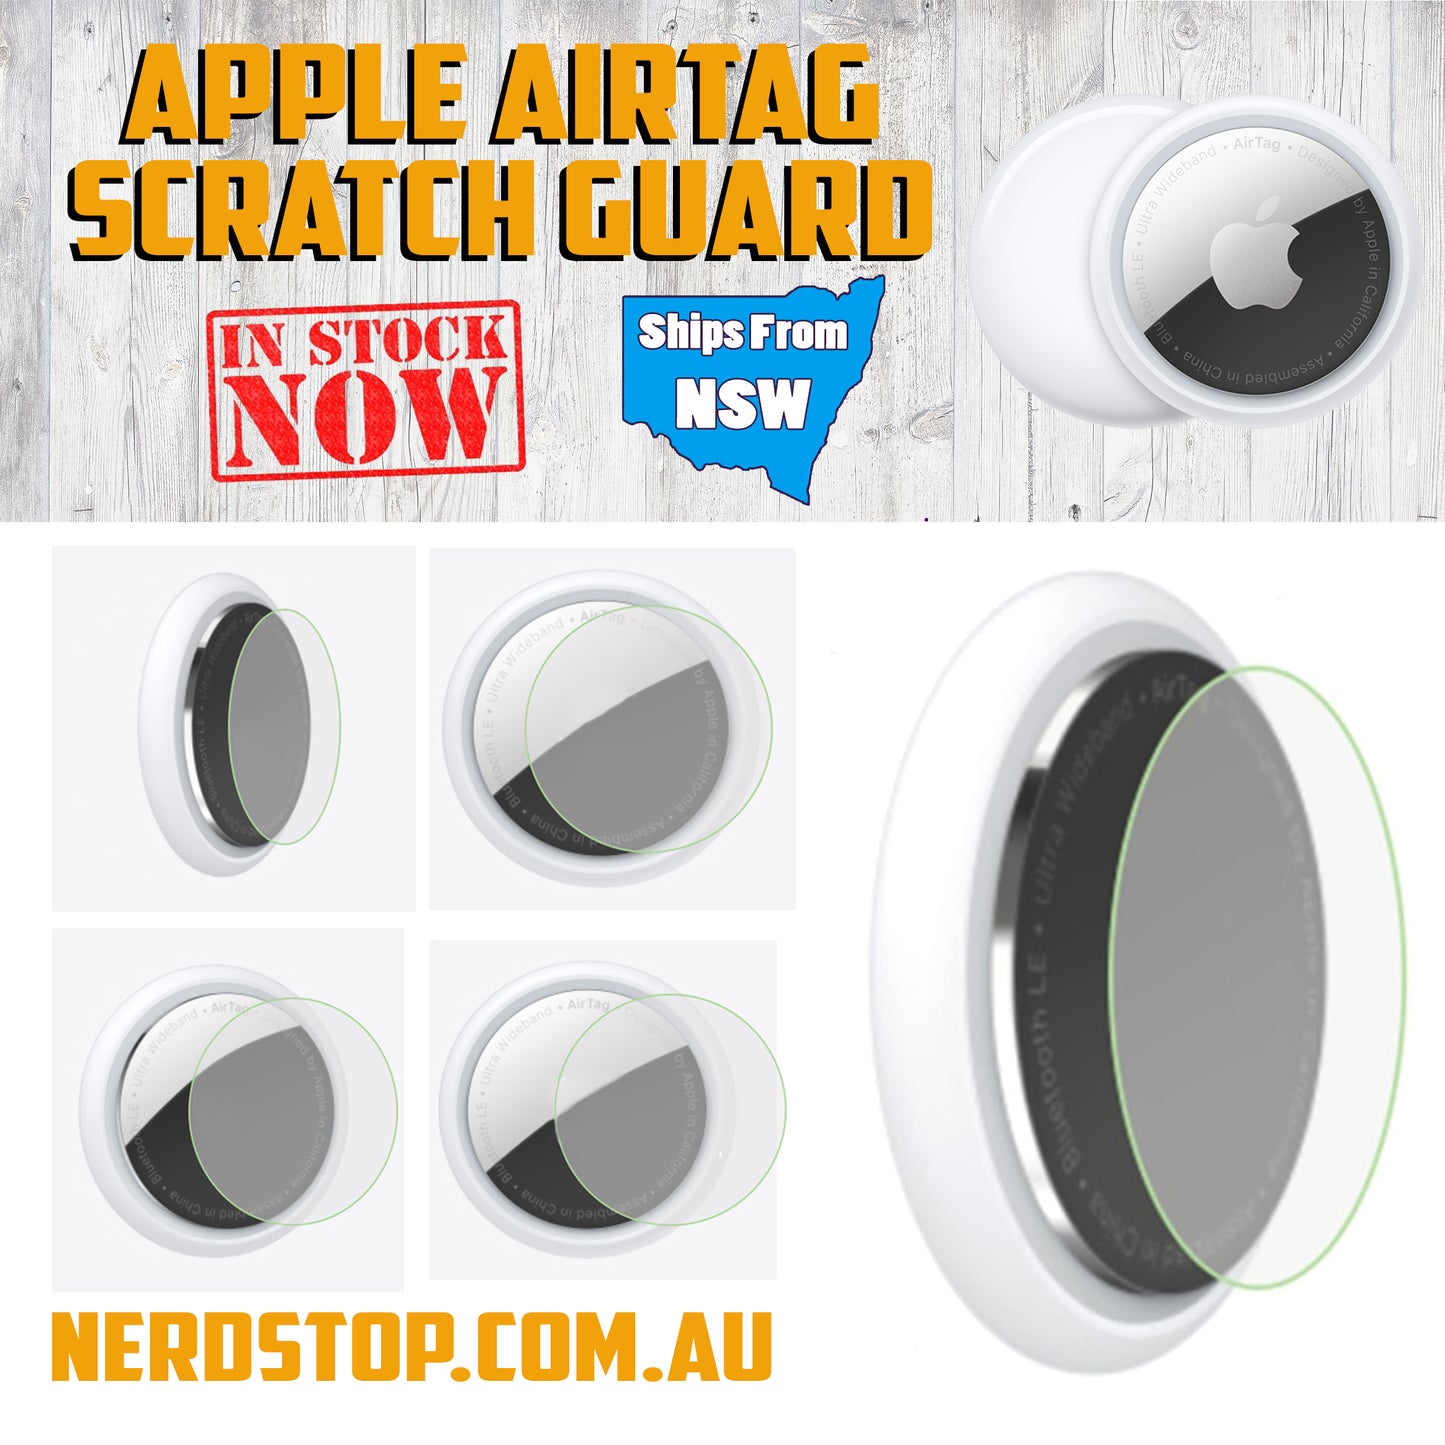 Apple AirTag Scratch Protector Film - 10 Pack - Nerd Stop